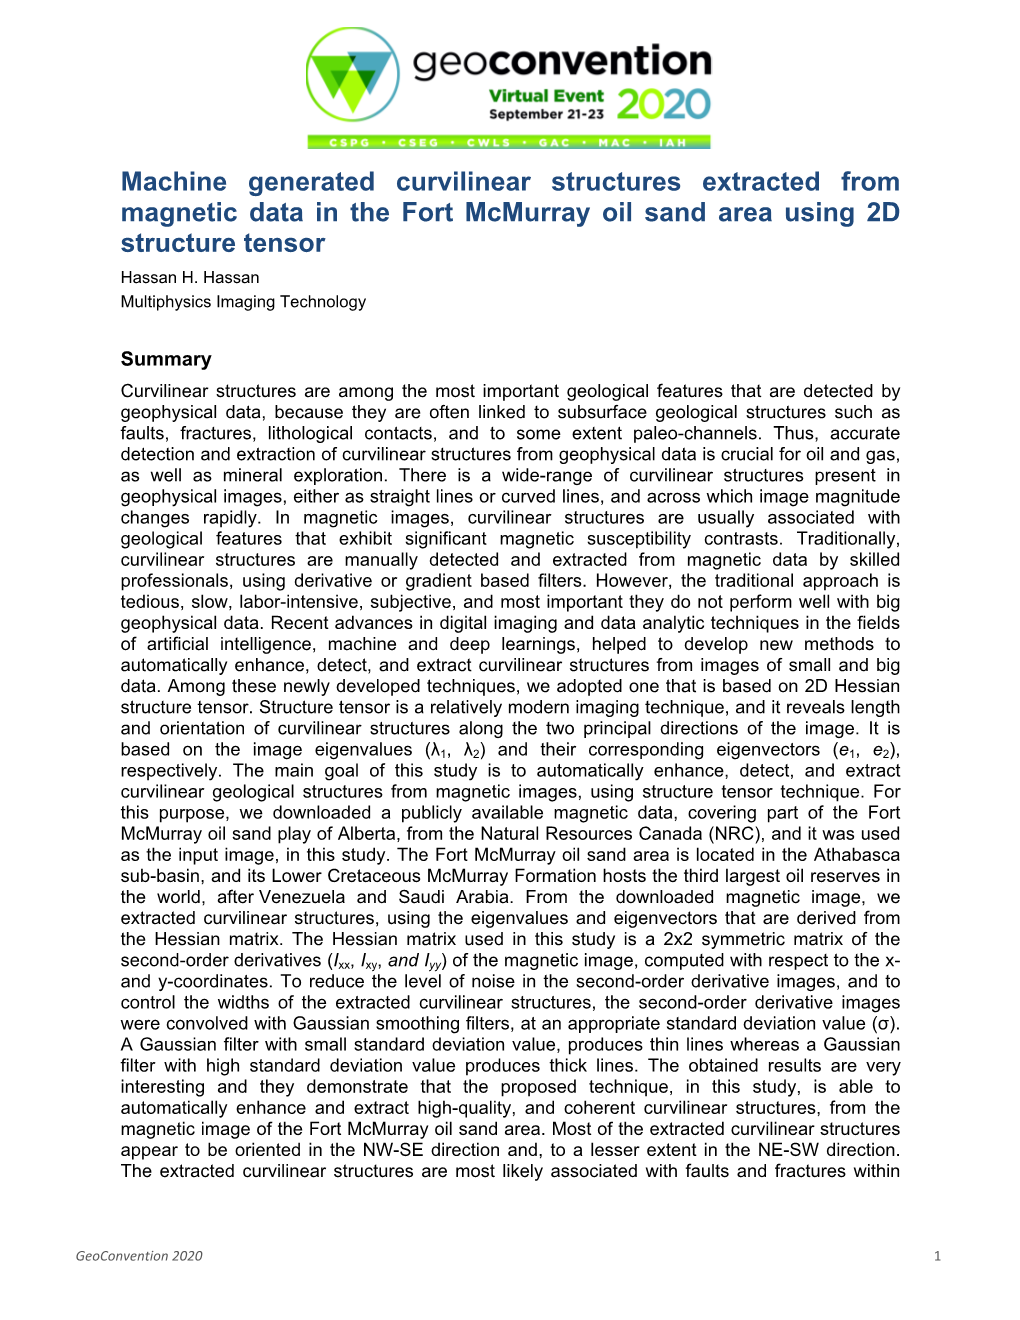 Machine Generated Curvilinear Structures Extracted from Magnetic Data in the Fort Mcmurray Oil Sand Area Using 2D Structure Tensor Hassan H